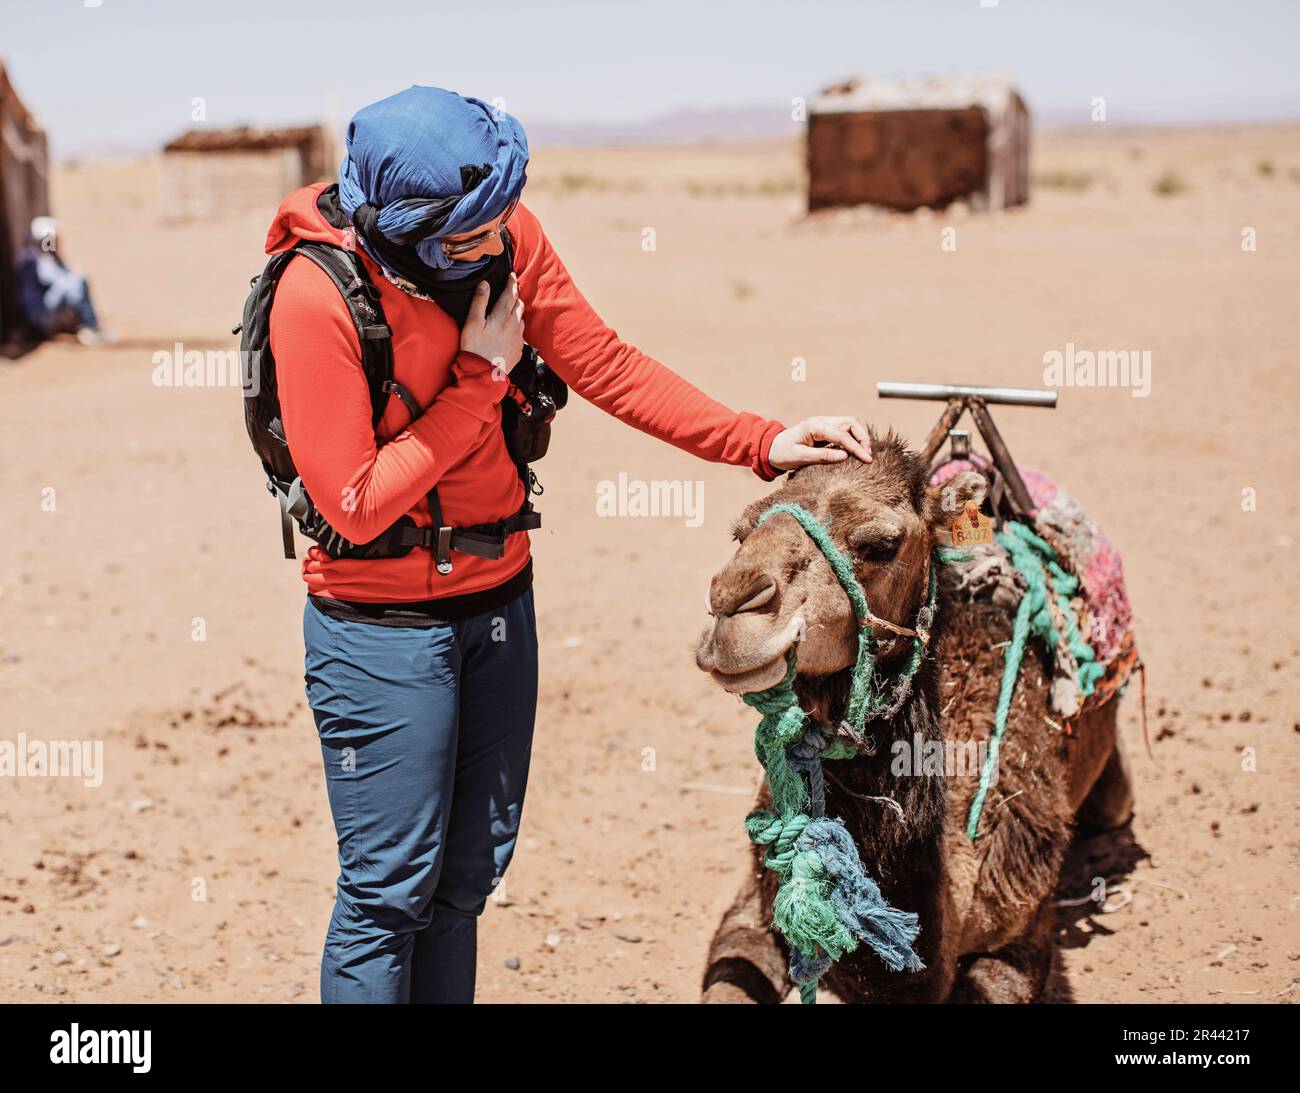 Female western tourist with hijab pats a camel in the desert, Morocco Stock Photo